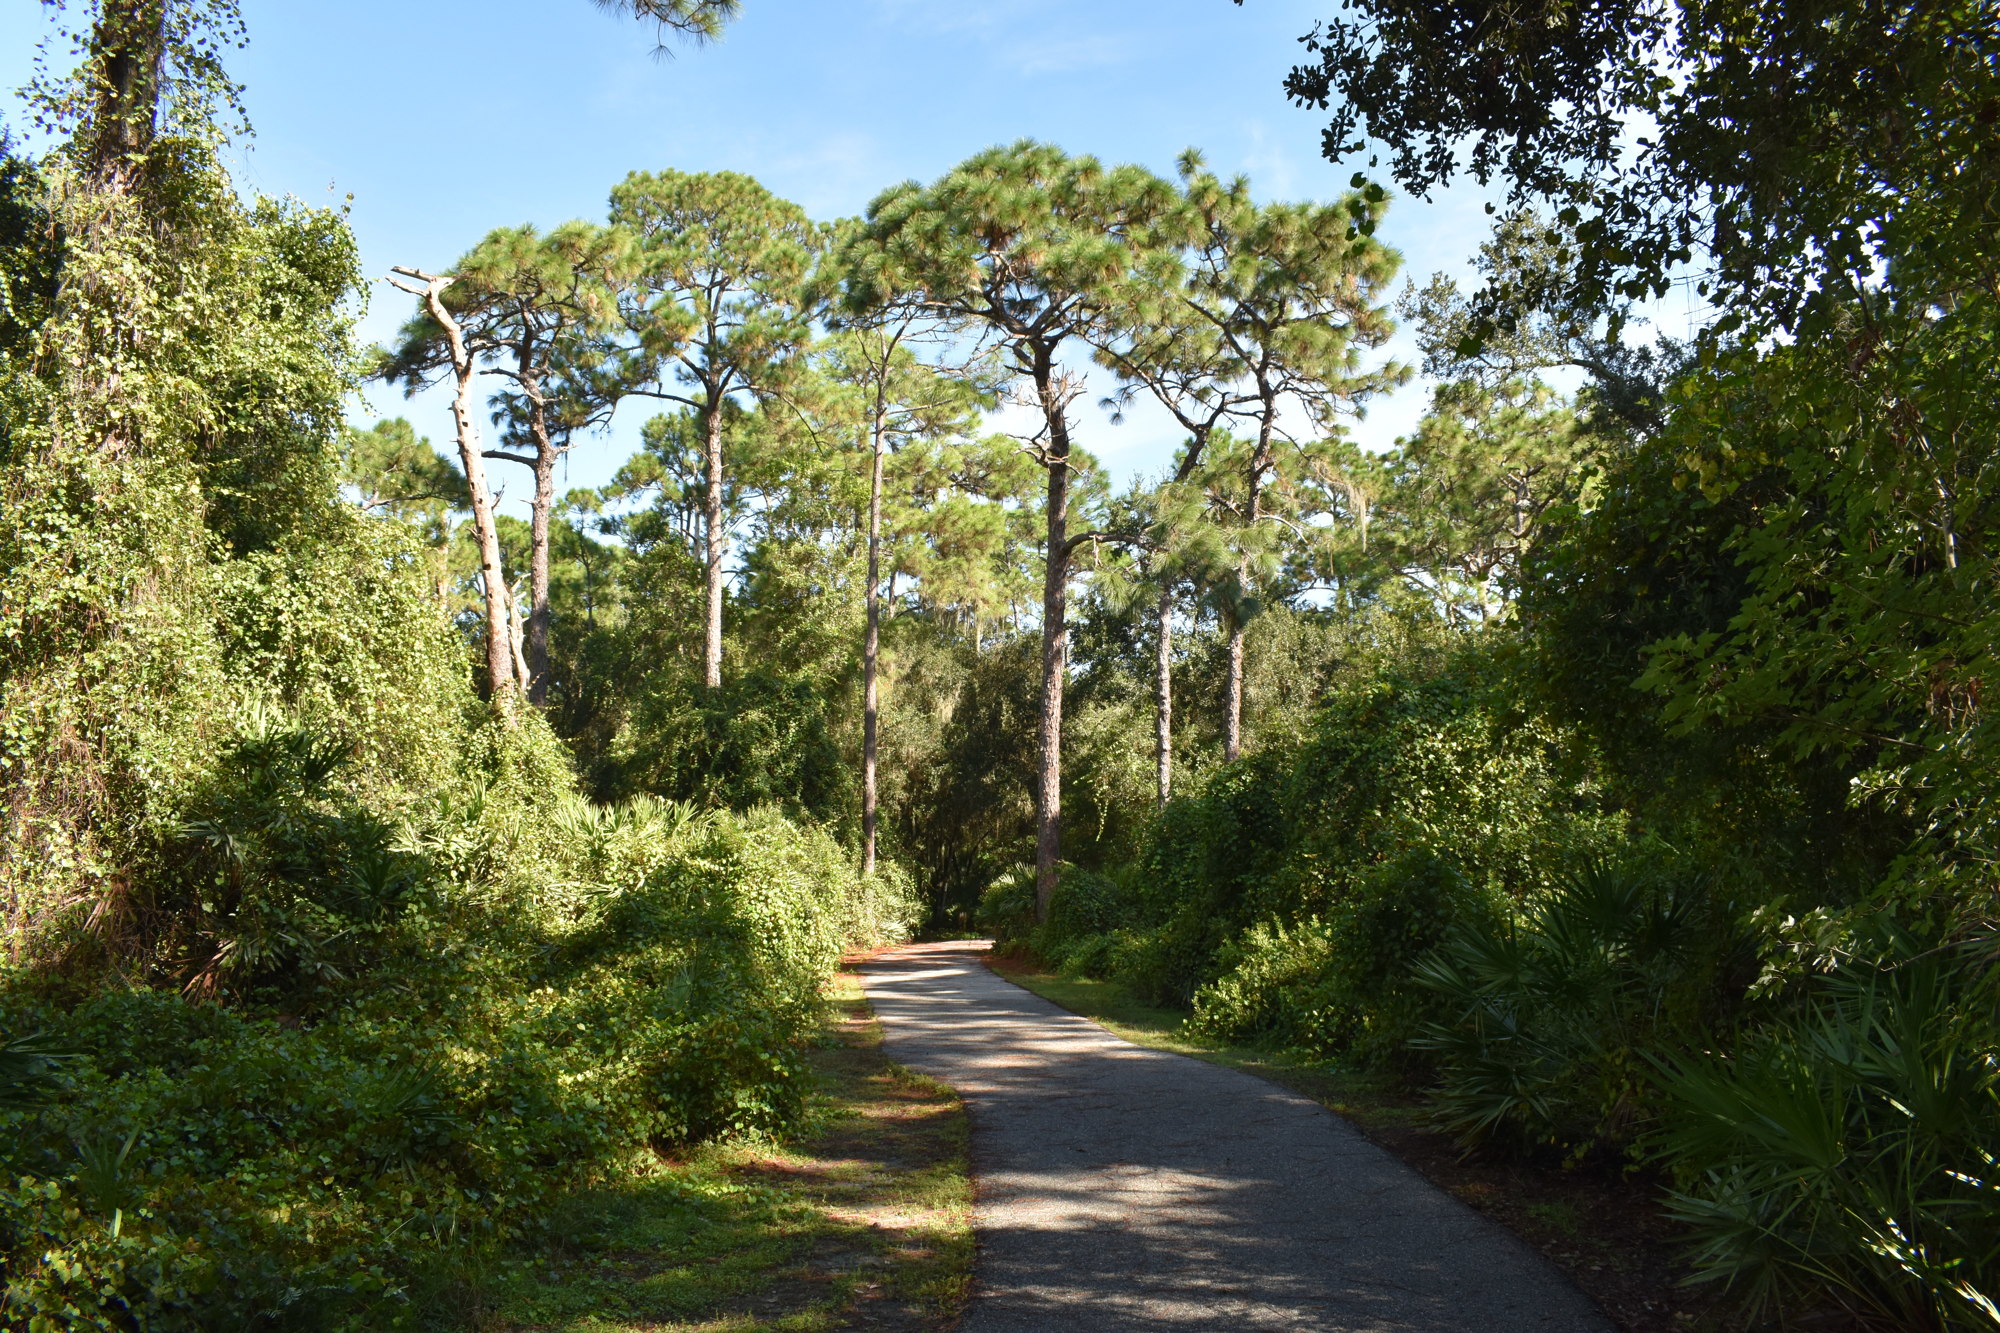 Conservatory Park in the University Park area is among the lands acquired by the county in the past, with nature trails among its features. (Photo by Ian Swaby)